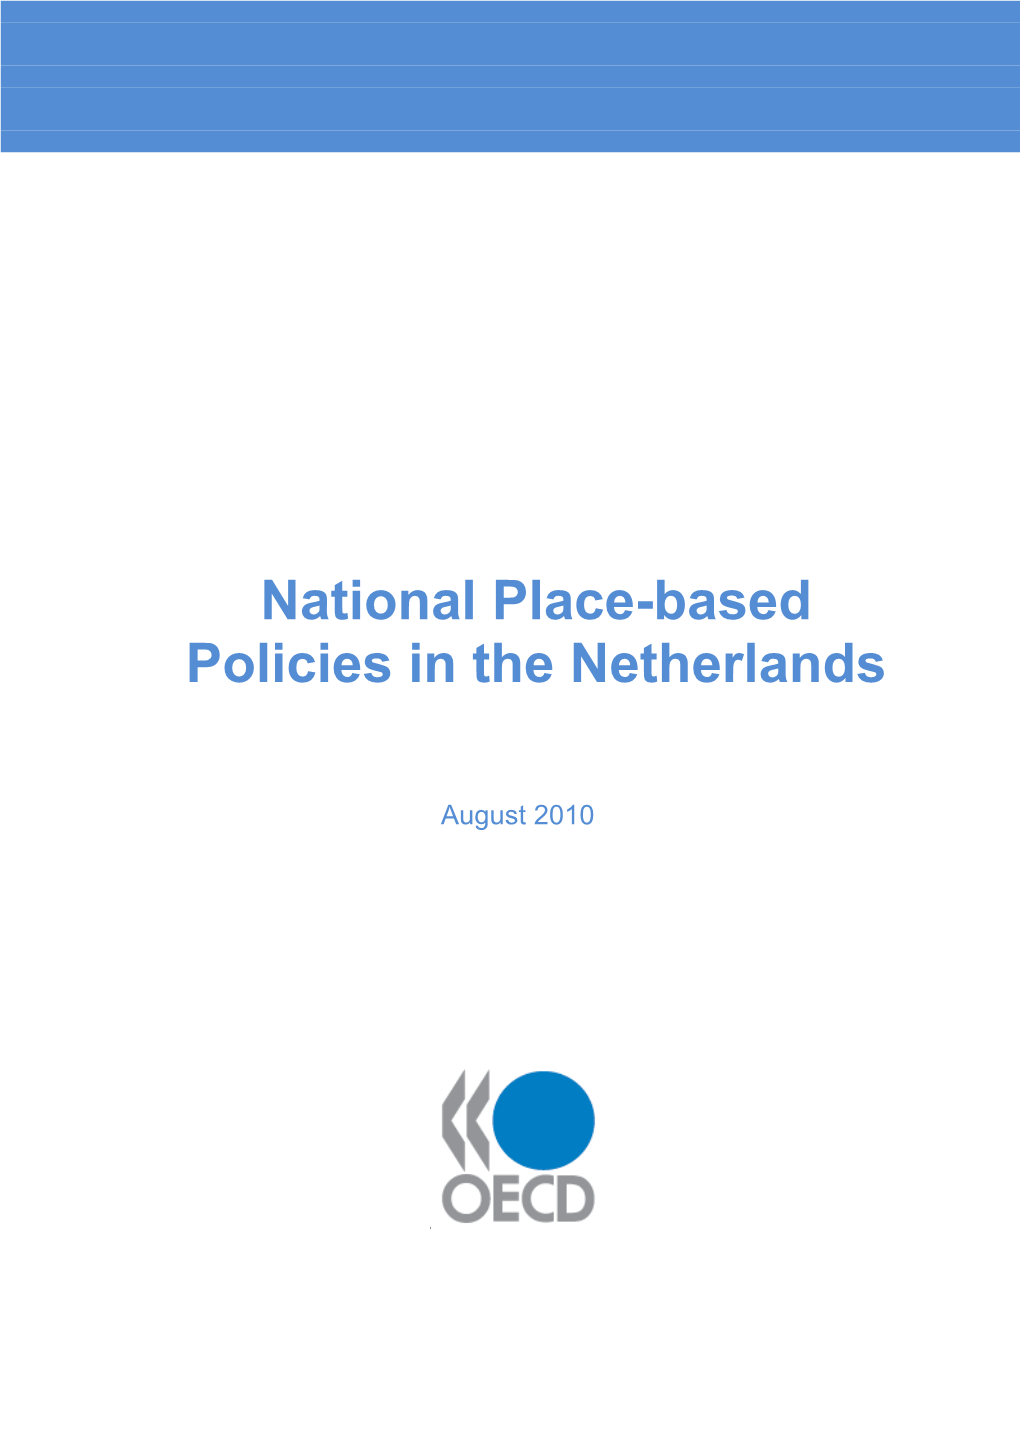 National Place-Based Policies in the Netherlands